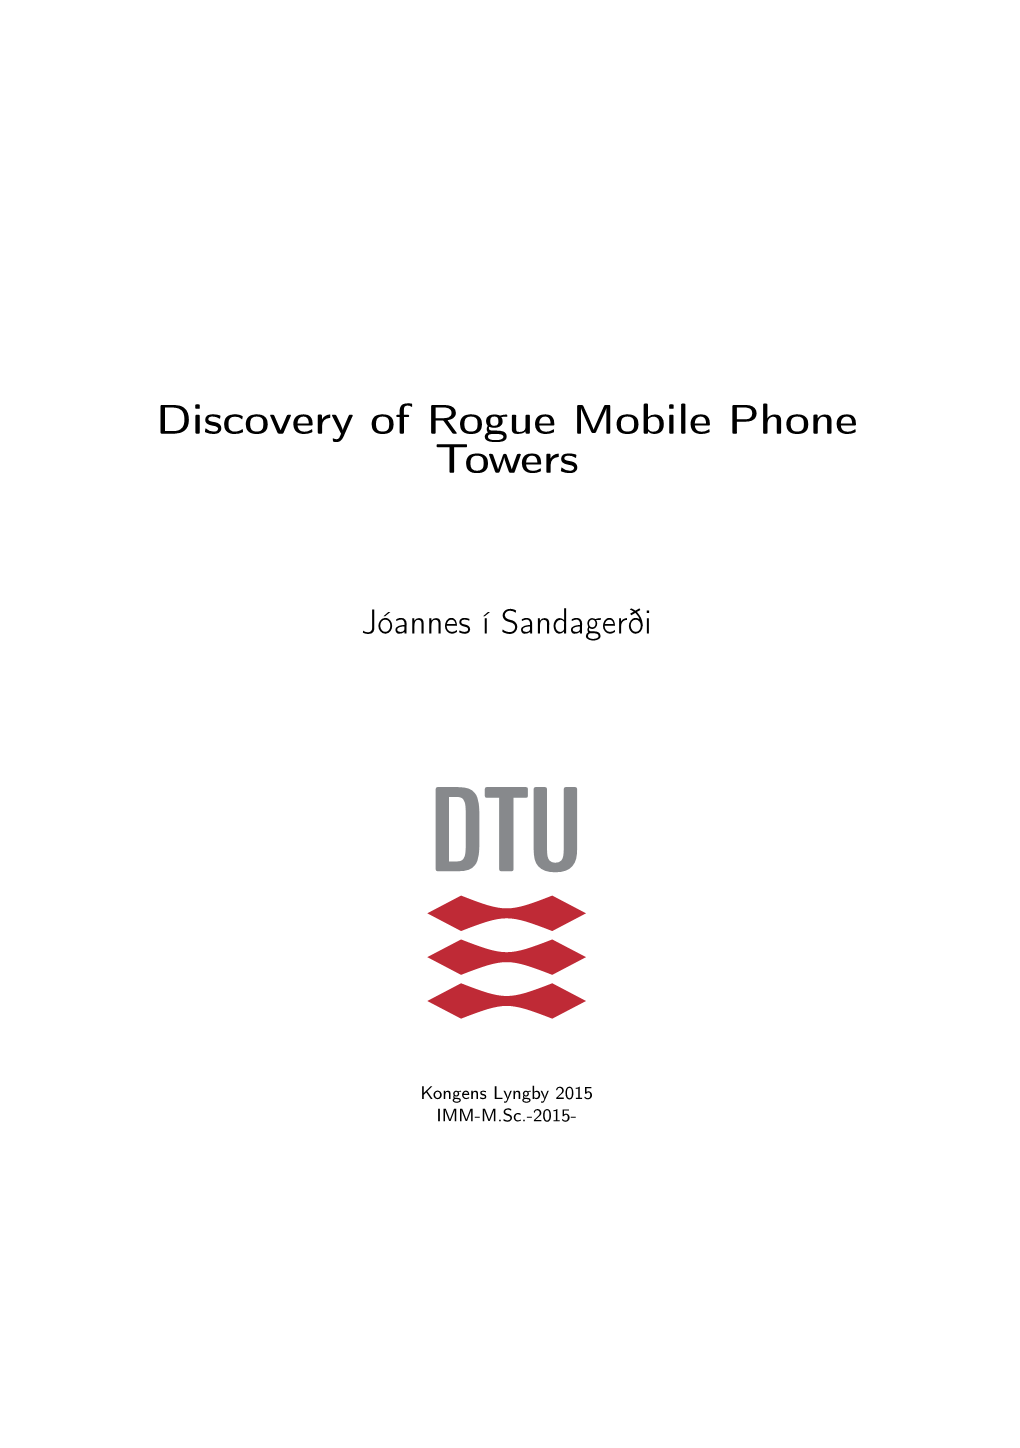 Discovery of Rogue Mobile Phone Towers